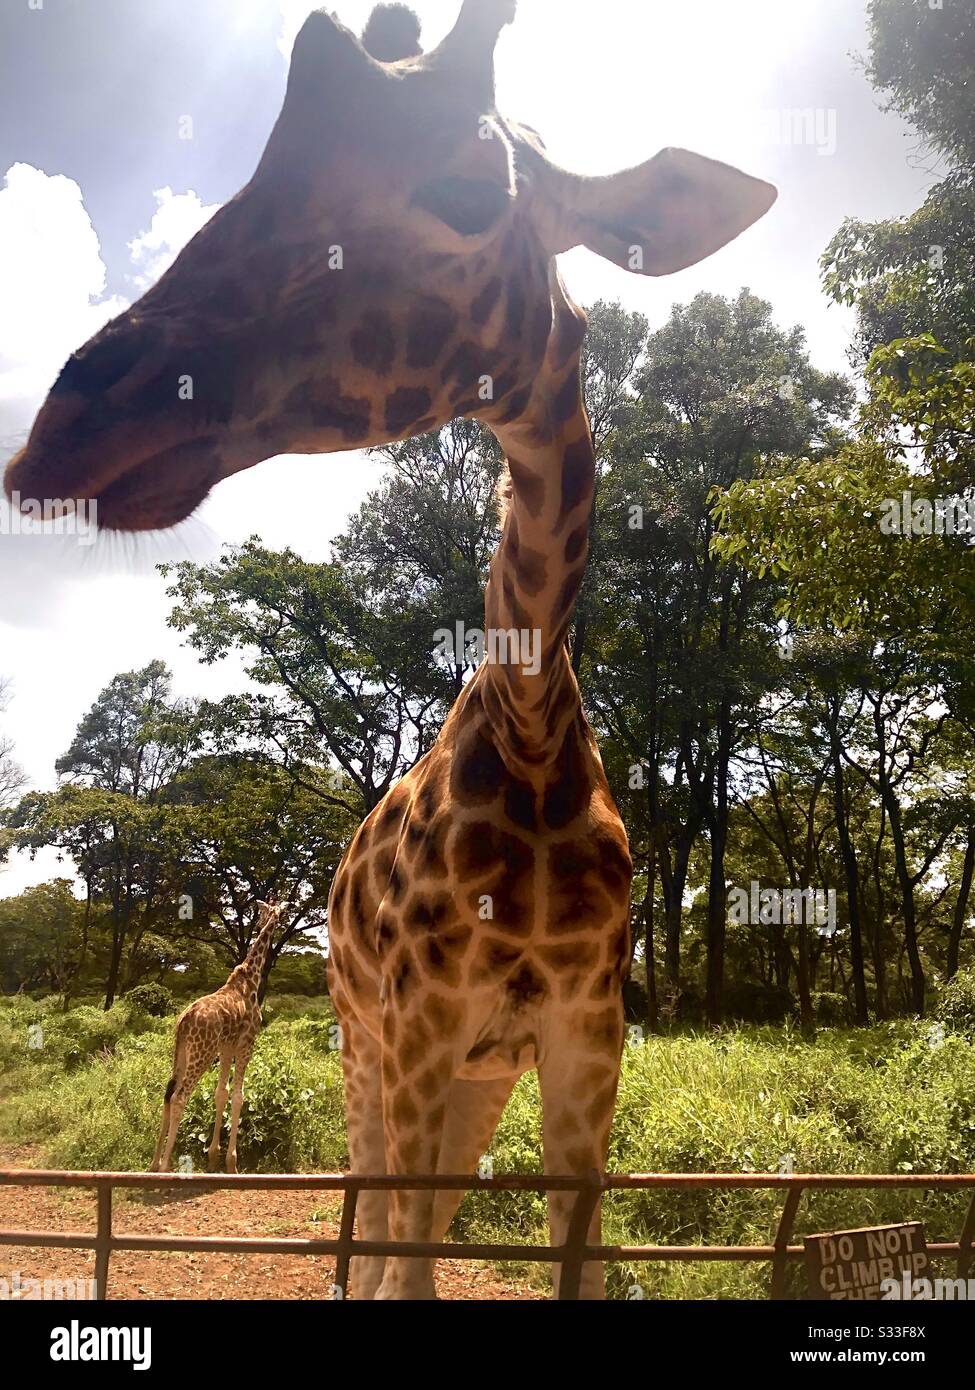 Girafe Up Close and Personal Banque D'Images